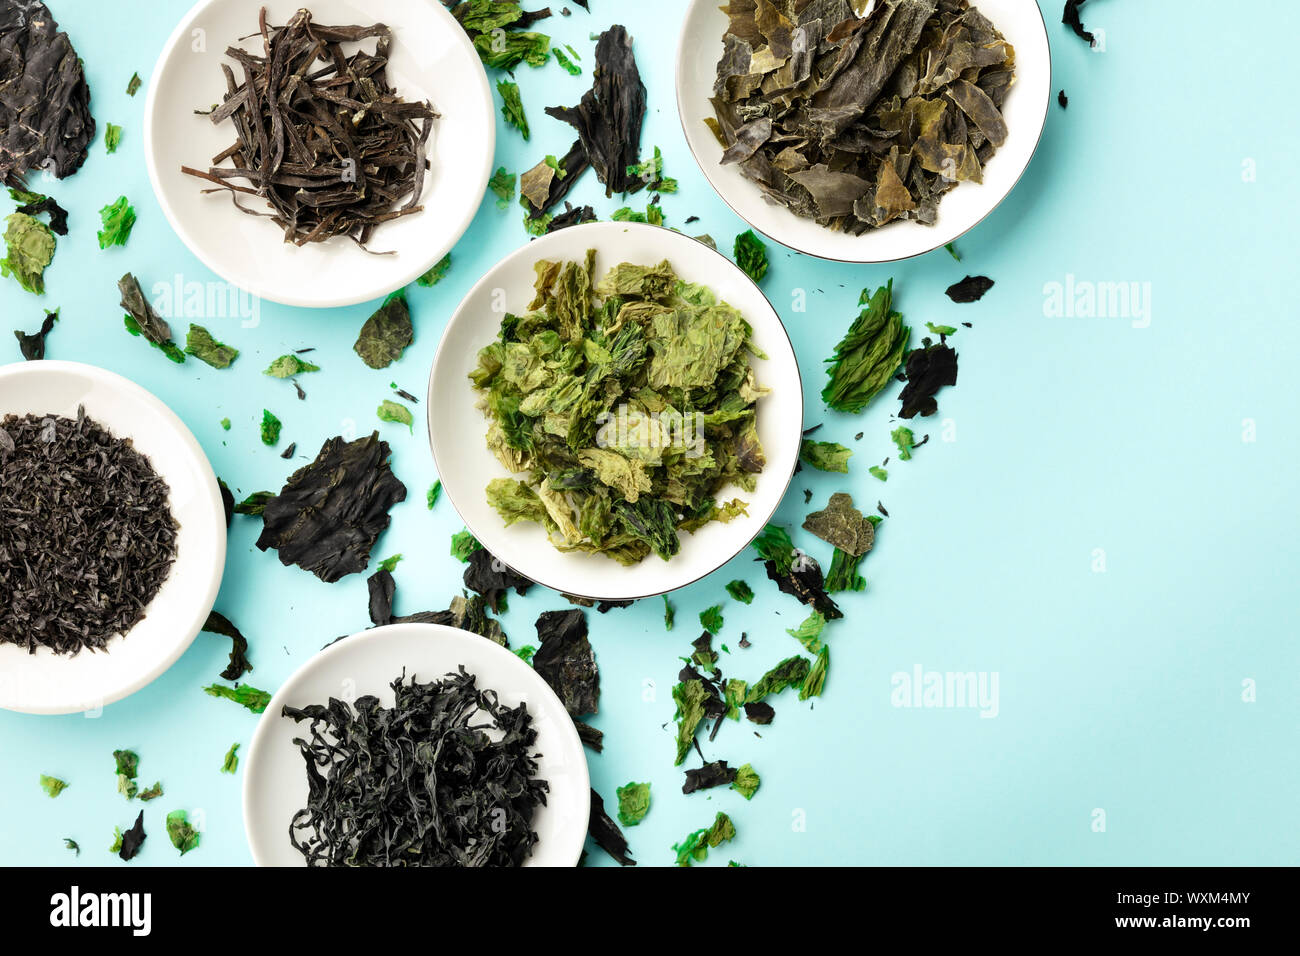 Various dry seaweed, sea vegetables, shot from above on a blue background with copy space Stock Photo